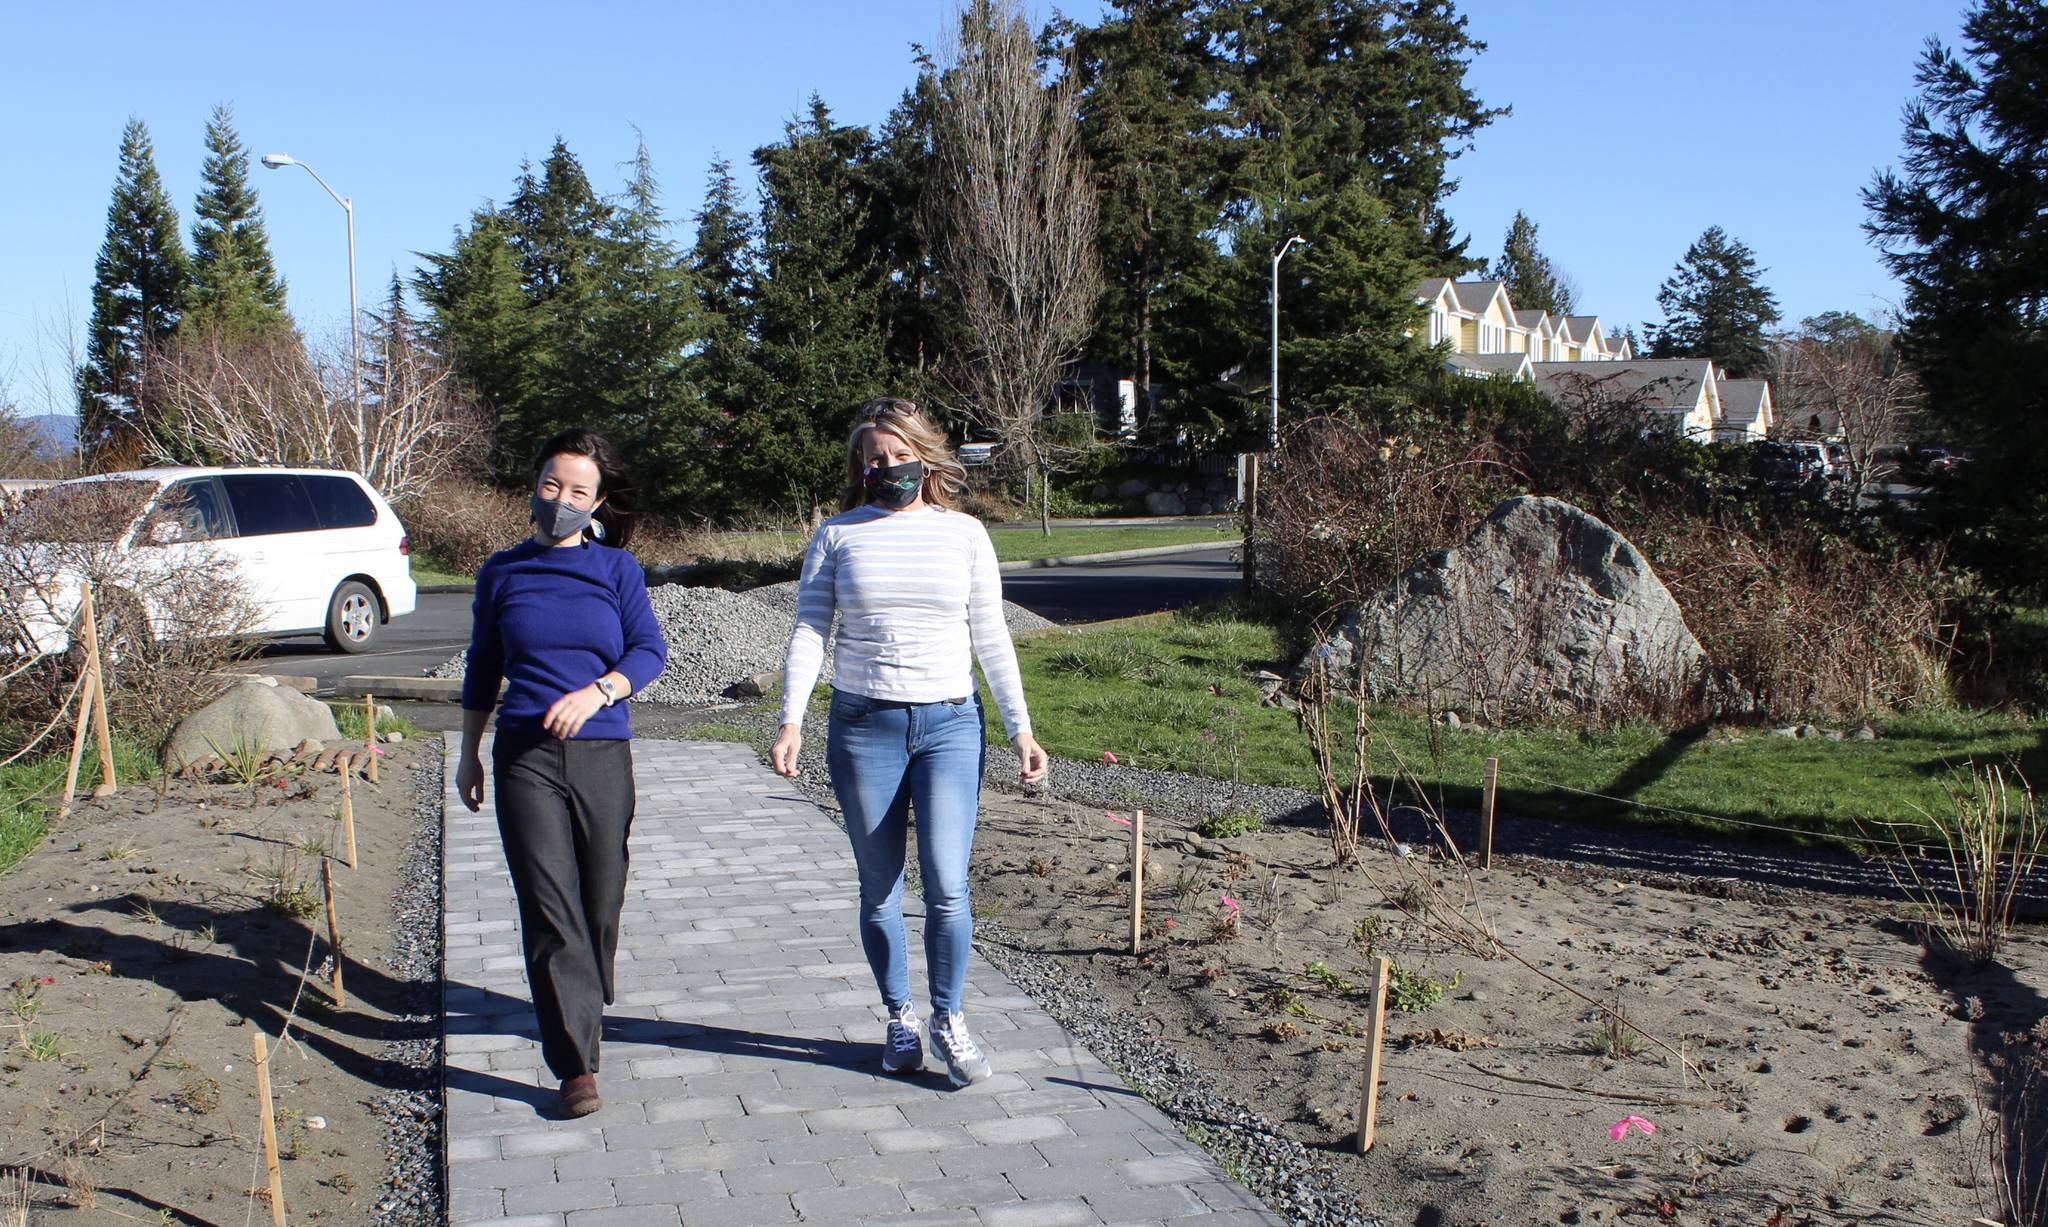 Joyce L. Sobel Family Resource Center staff members Delphina Liles and Mary Uri walk along the new back sidewalk with new landscaping to connect the food bank and family resource center to the Mullis Senior Center parking lot. (Contributed photo)